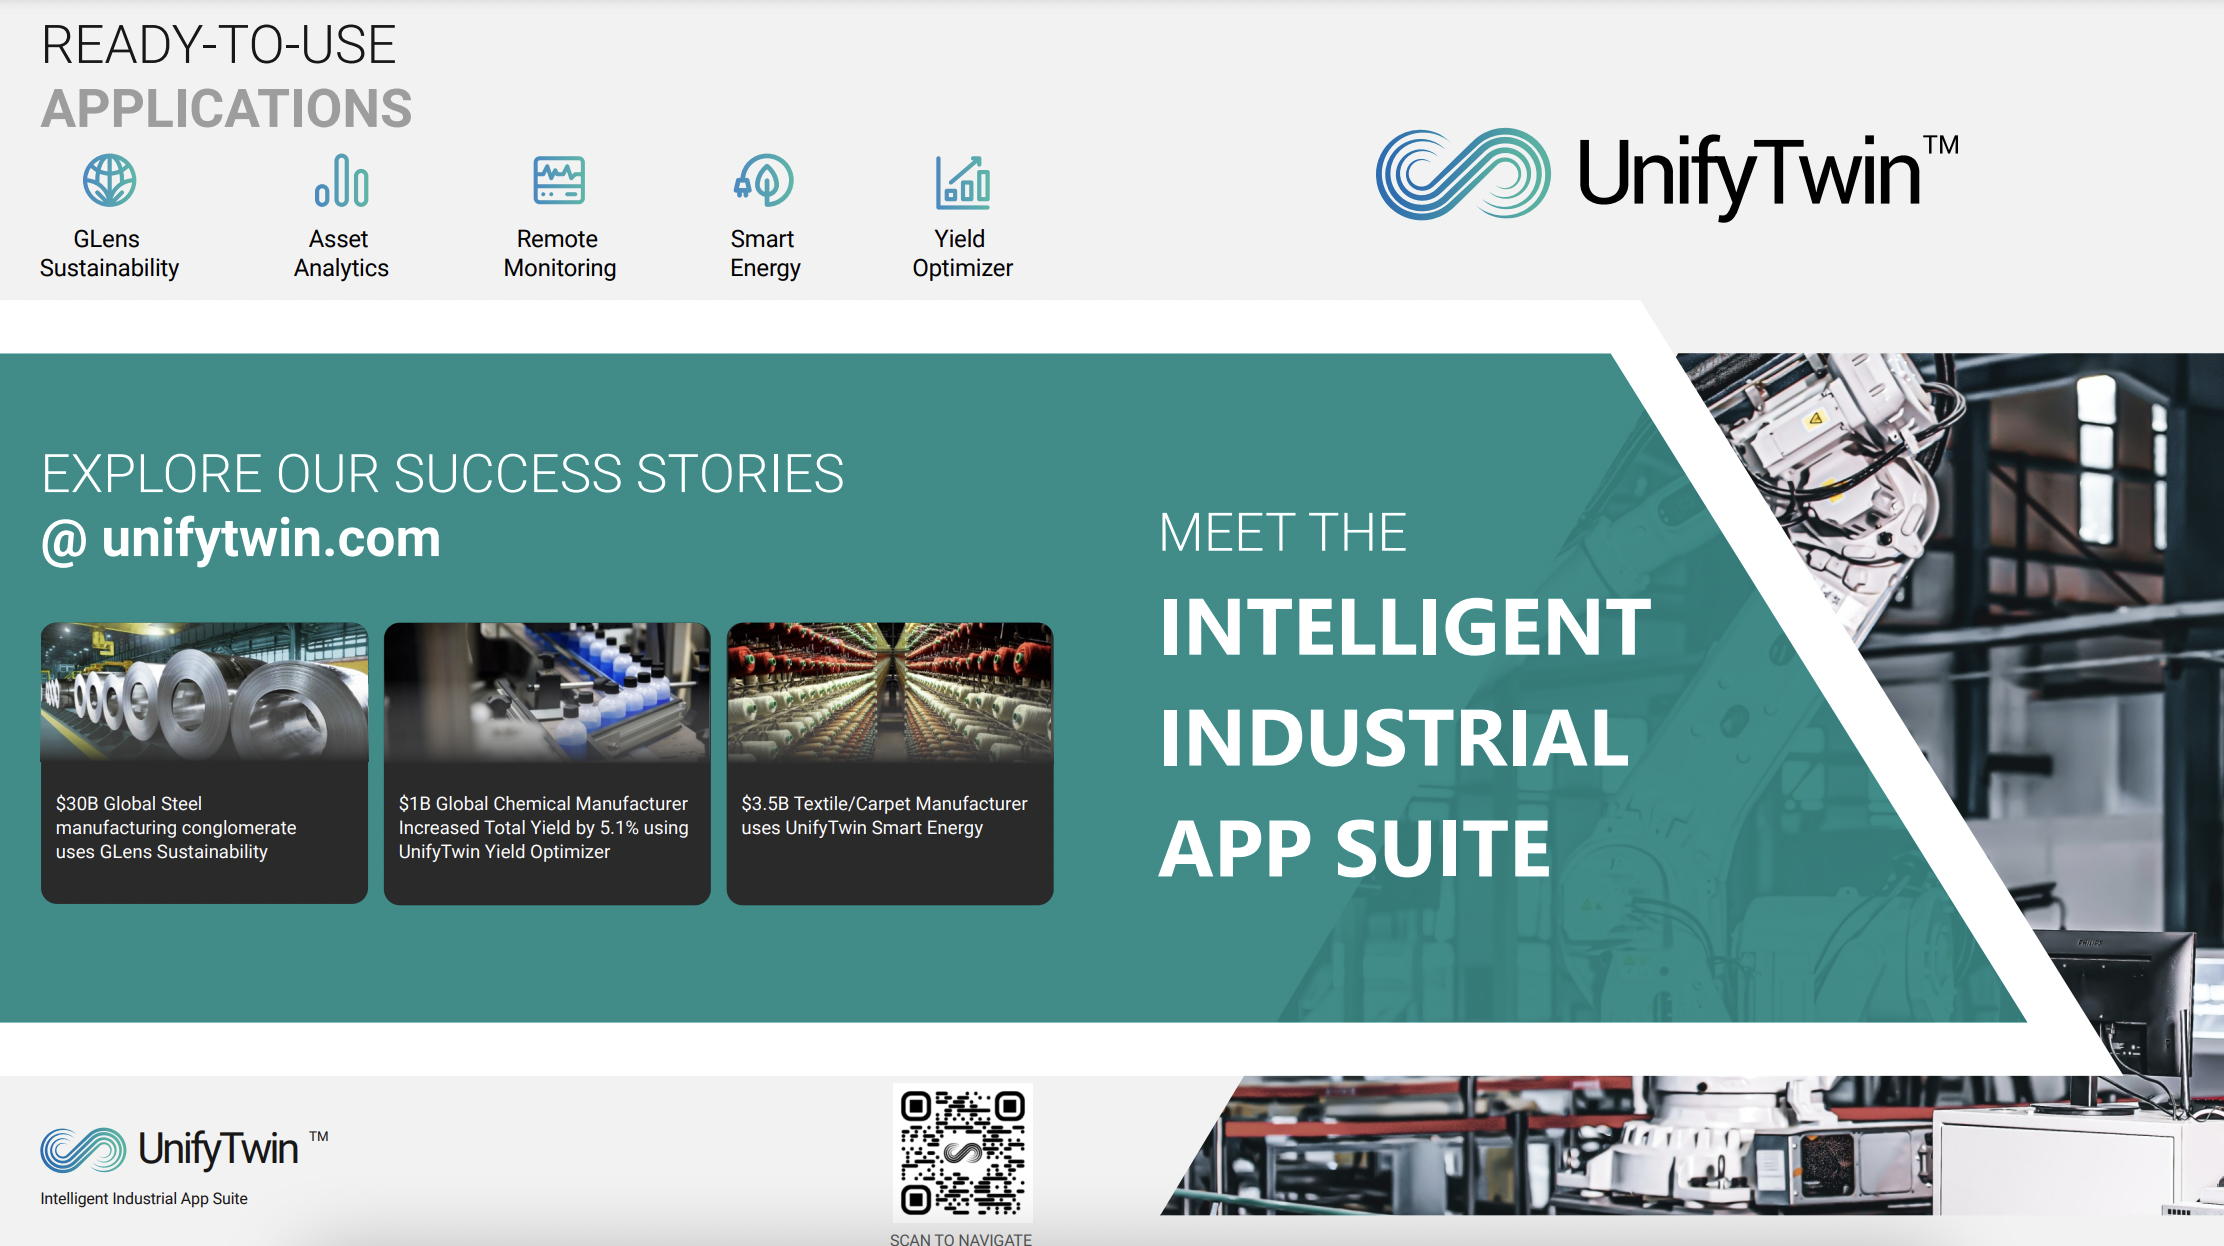 UnifyTwin Announce a Global Partnership with Technologies New Energy (TNE) for Smart Energy Solutions to Utilities & Manufacturers